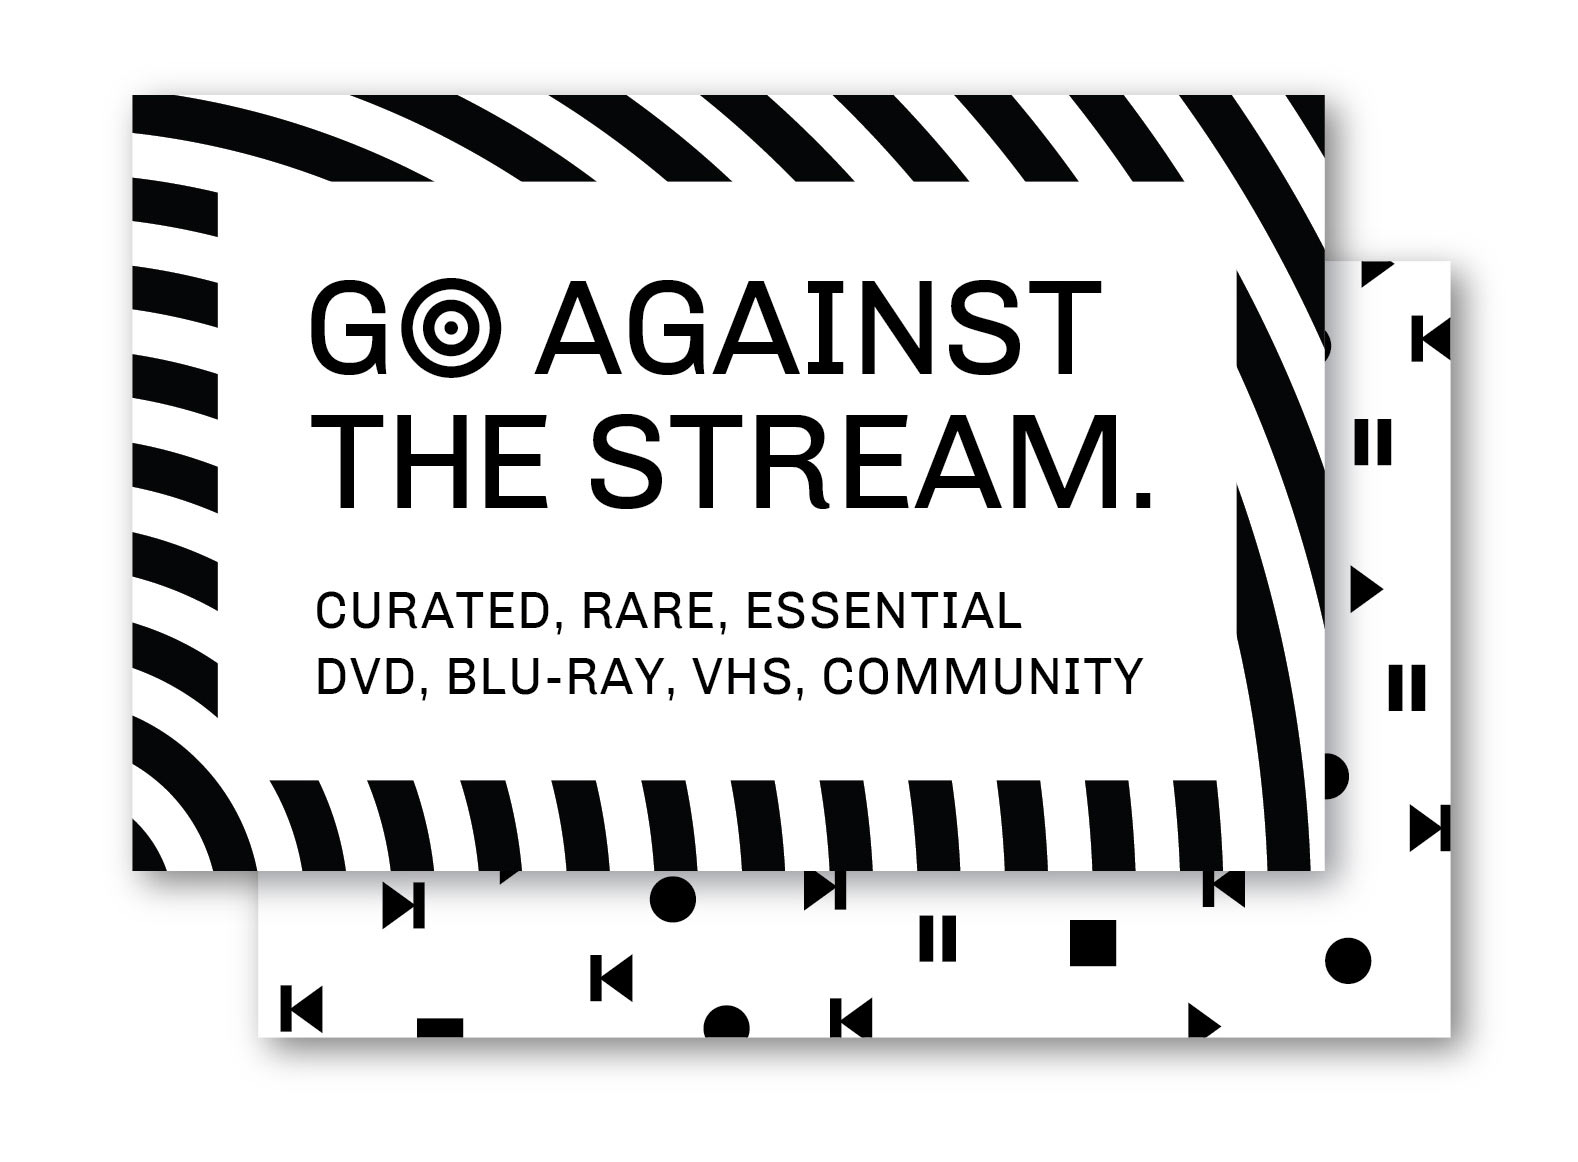 Go against the stream. Beyond Video brand identity and logo for contemporary video store and lending library